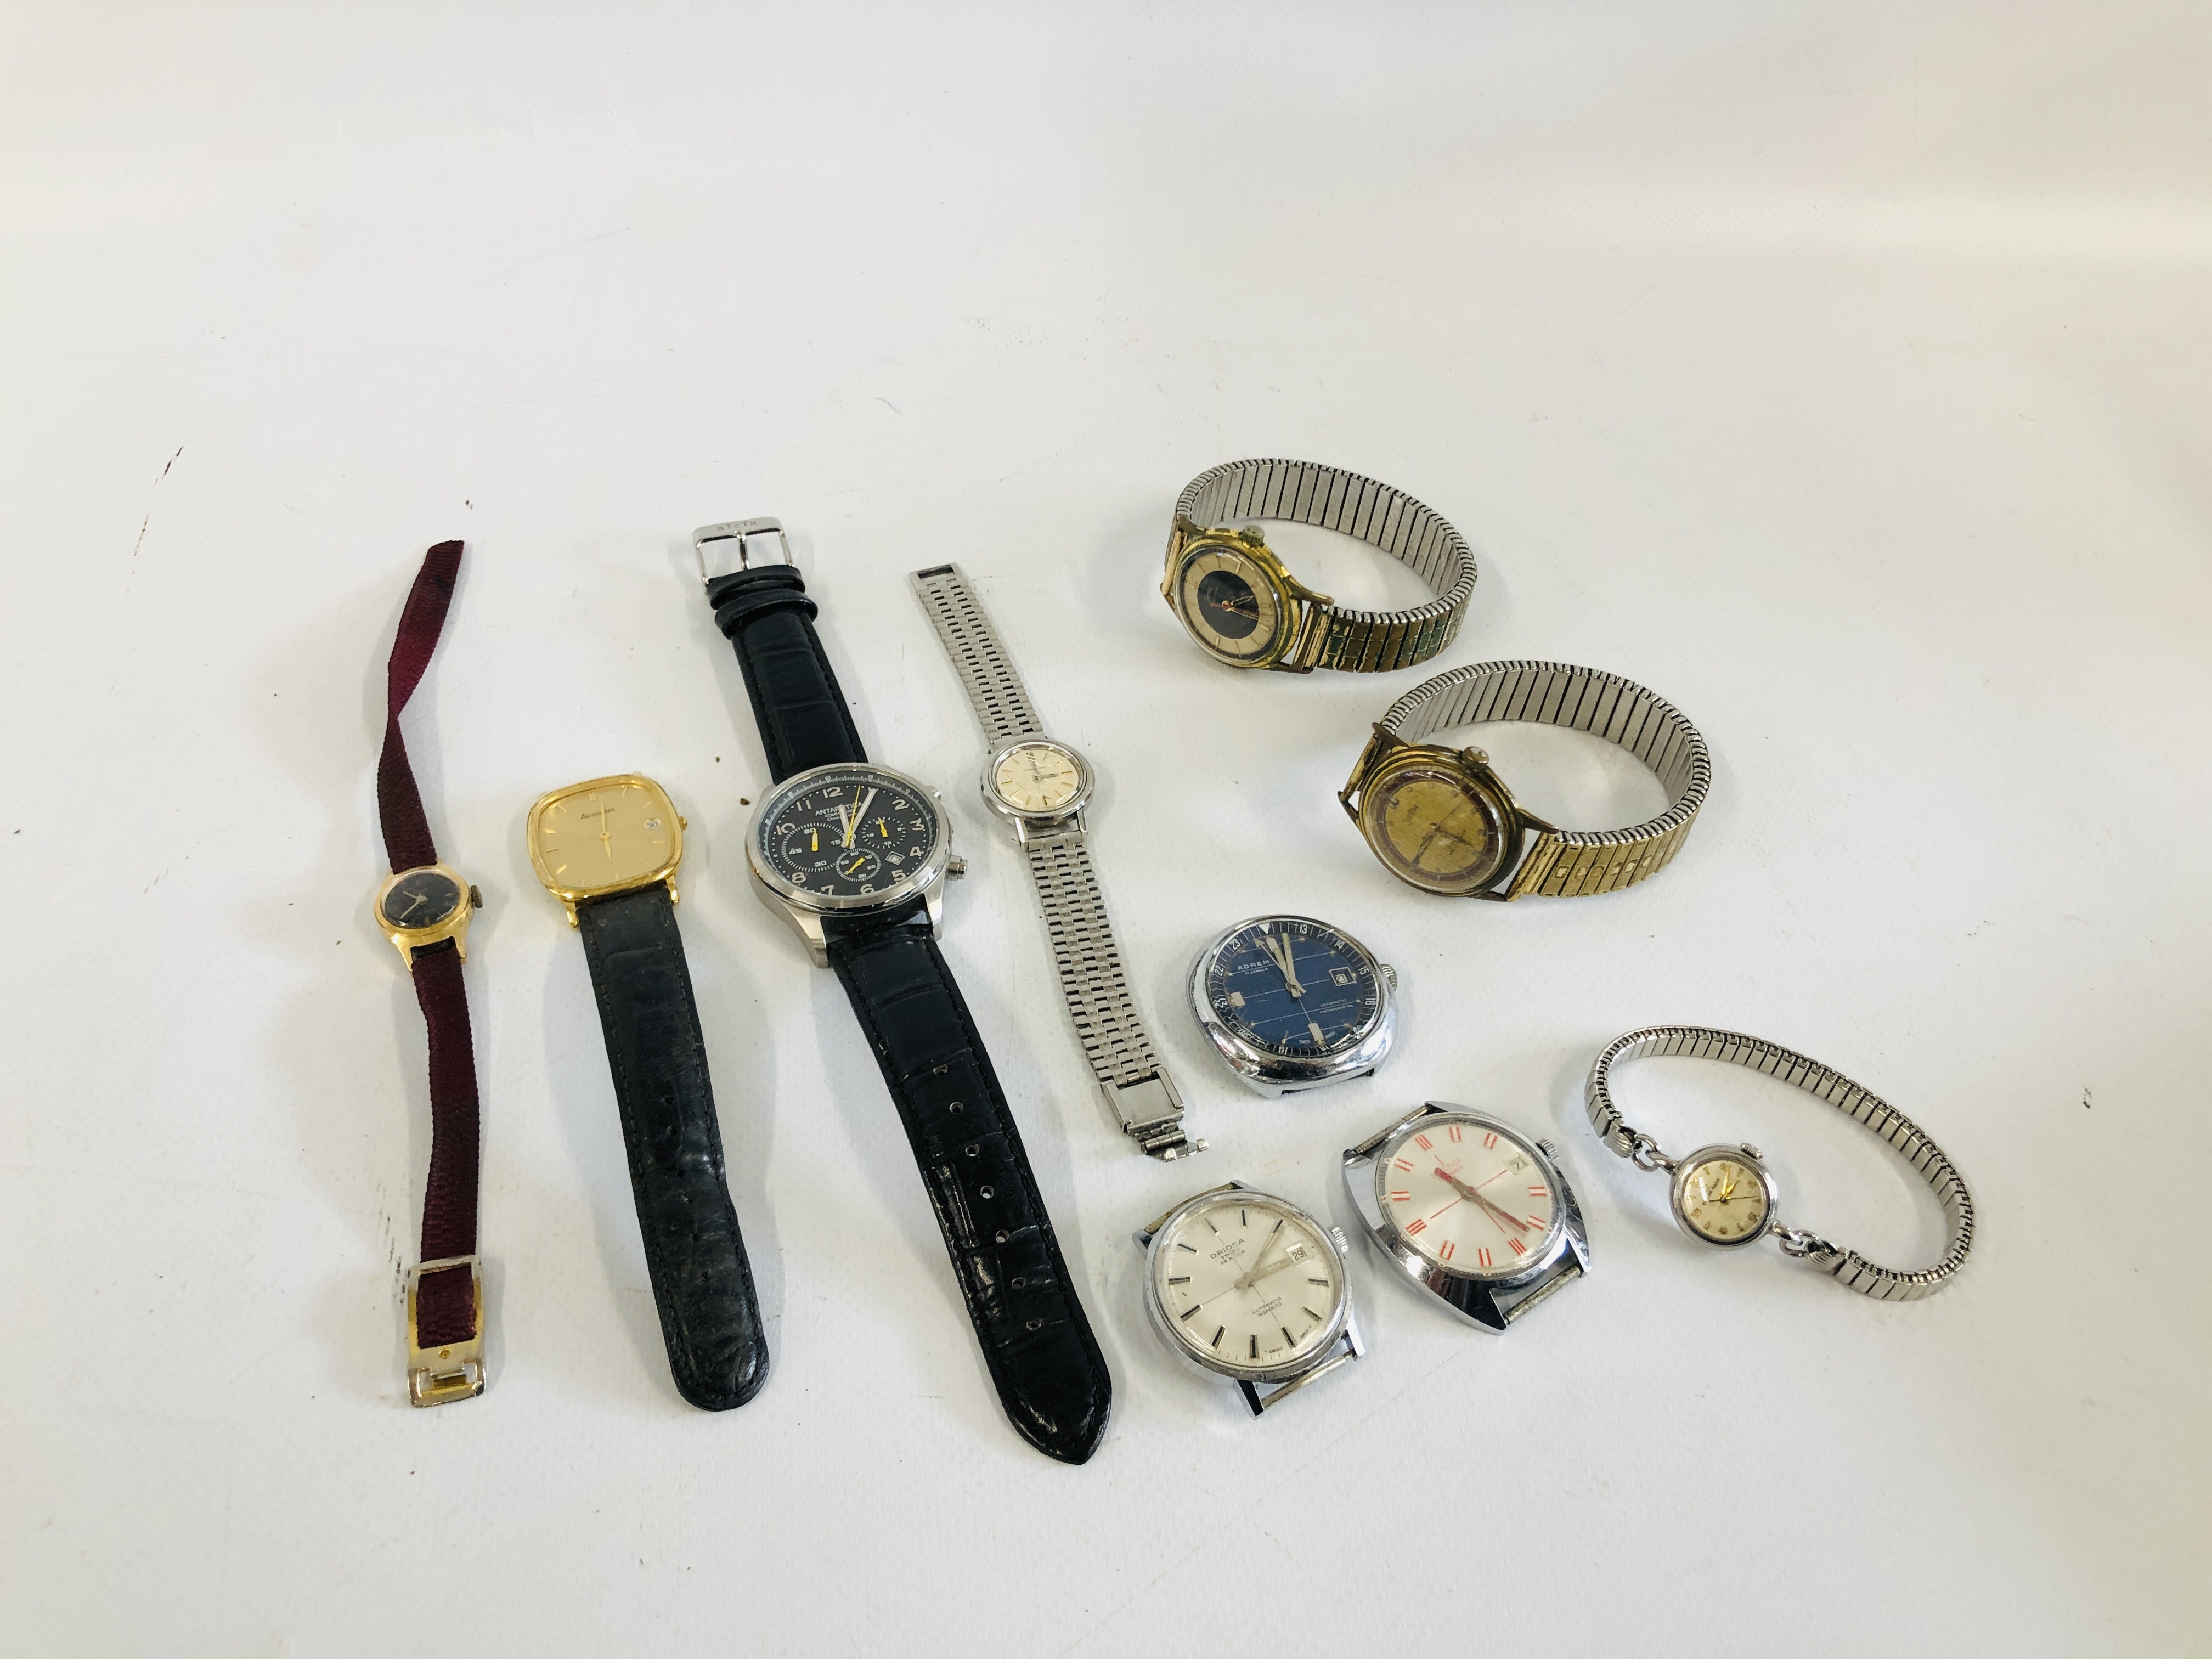 BOX OF ASSORTED VINTAGE WATCHES TO INCLUDE ACCURIST, ORIOSA, ETC.